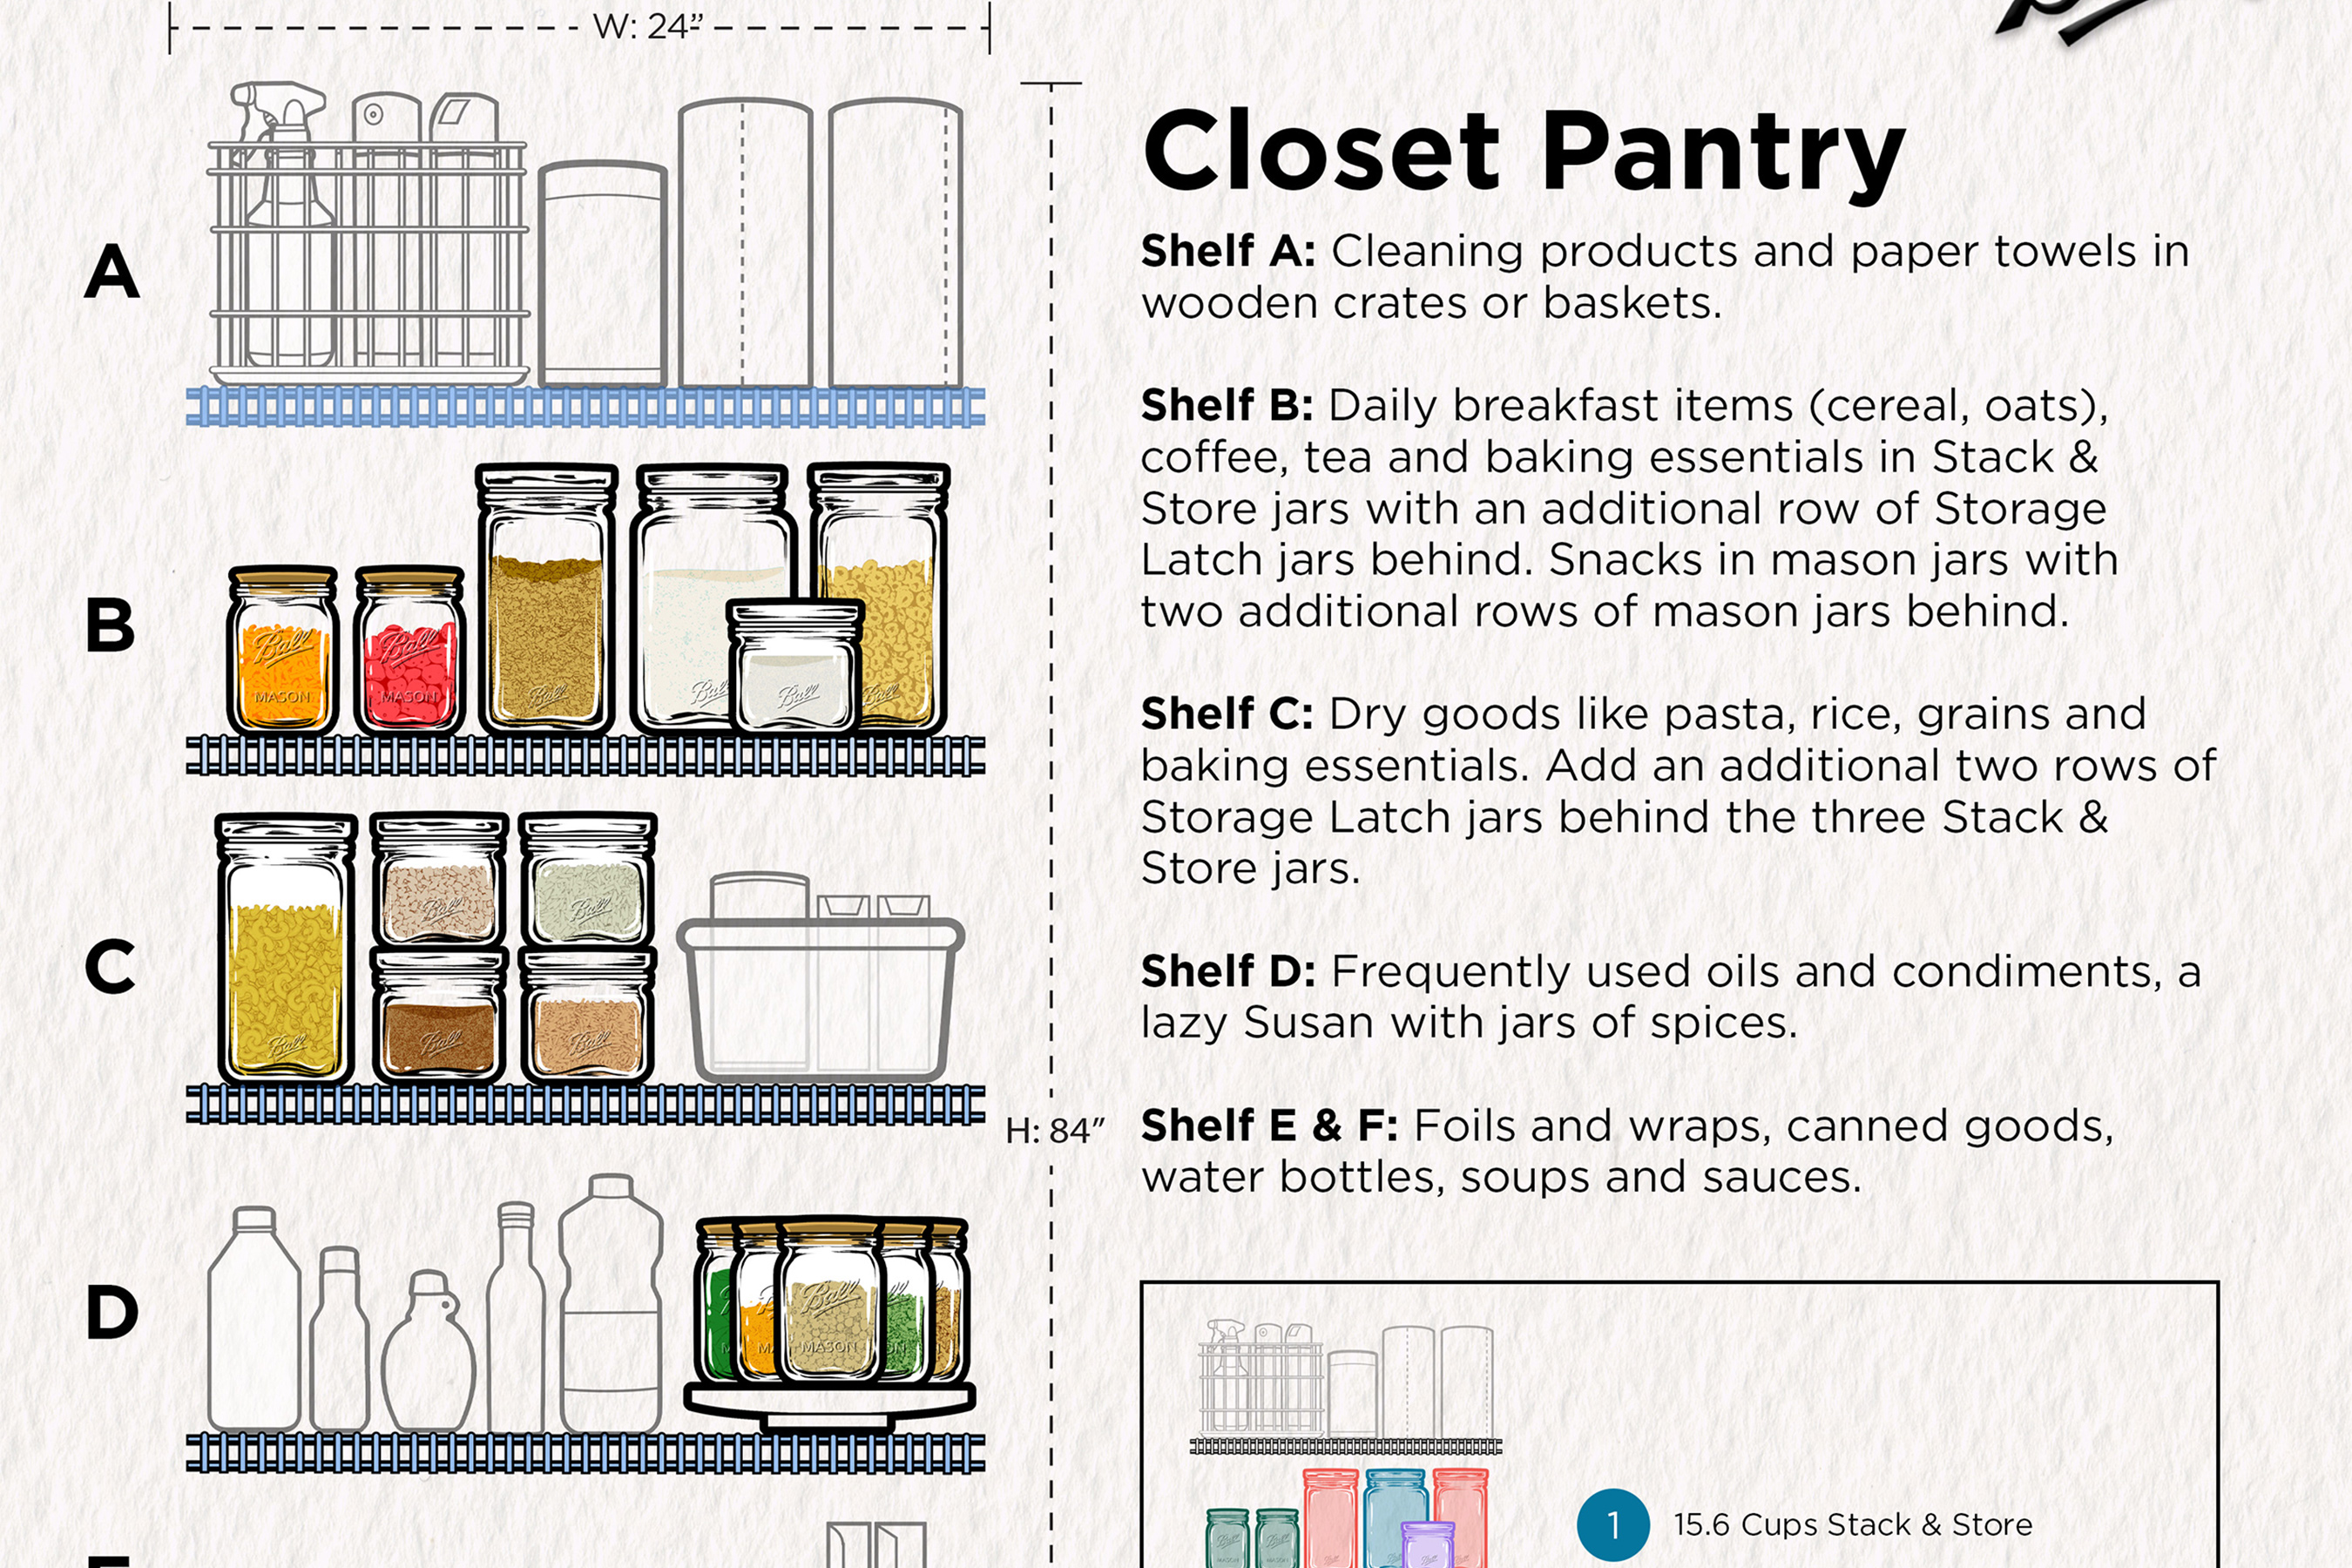 The makers of Ball® home canning are taking the guesswork out of pantry organization with blueprint for setting up a closet pantry. Layout courtesy of Kim Bui (@xomyhome).